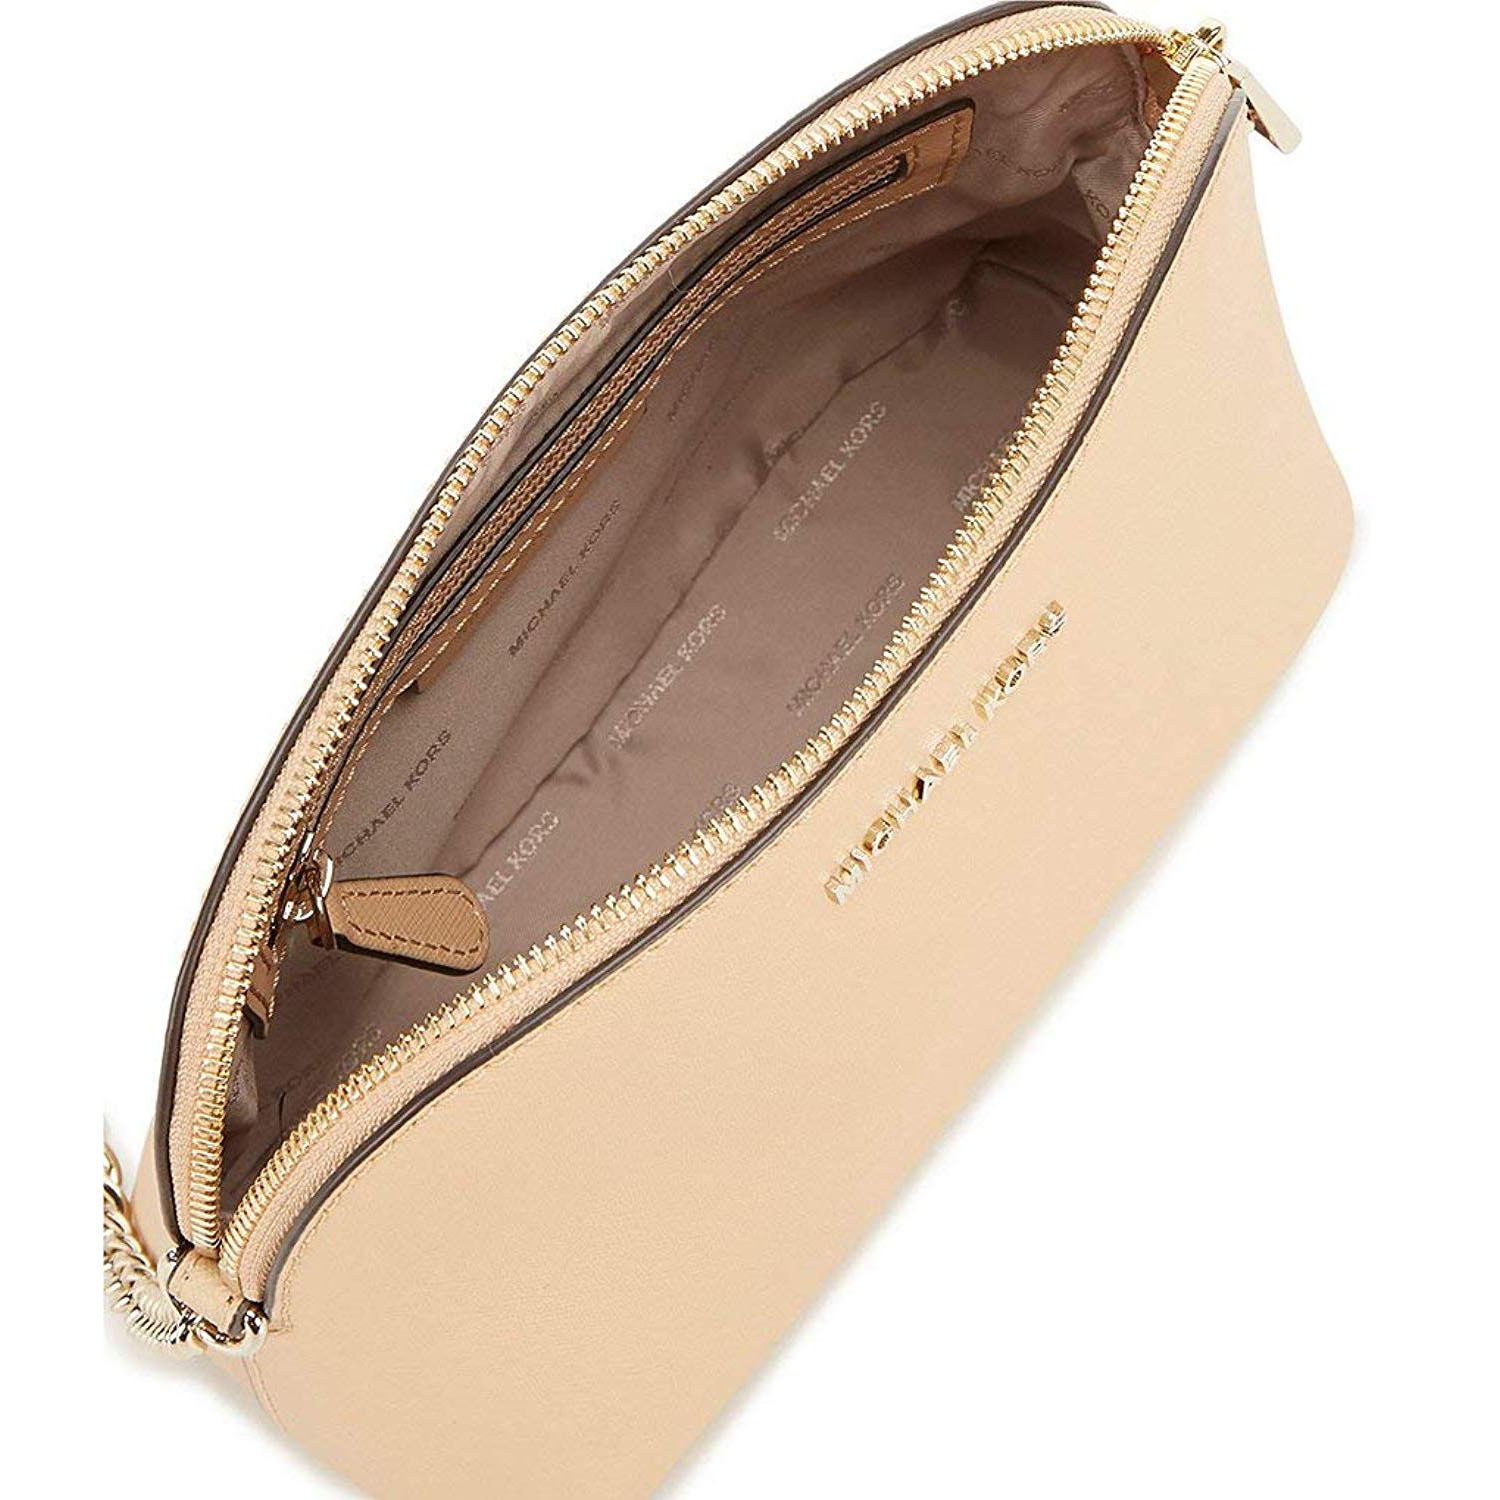 Michael Kors Crossbody Bag In Gift Box Cindy Large Dome Leather Crossbody Butternut Nude Beige # 32T8TF5C9L